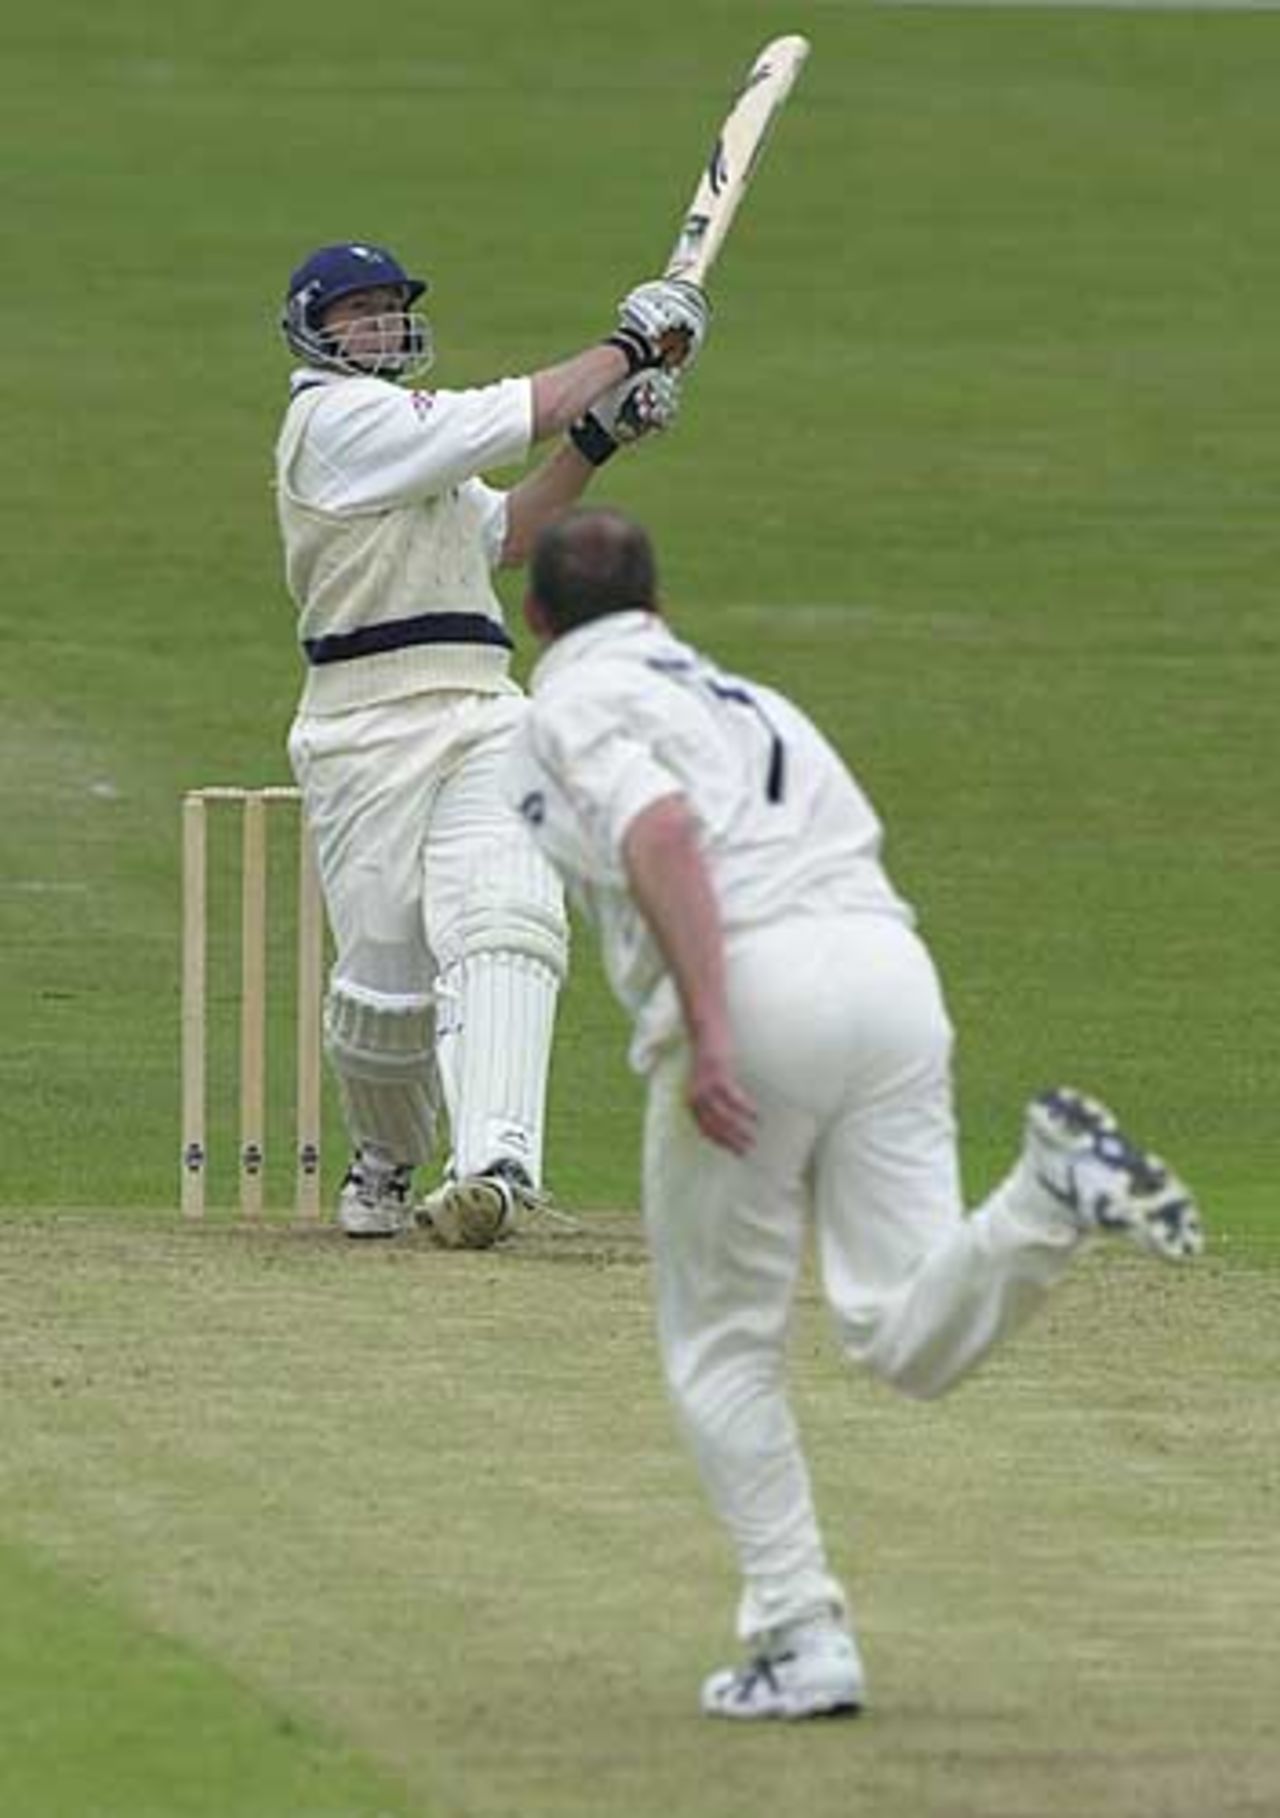 Bresnan with a lusty swing off the bowling of Wood